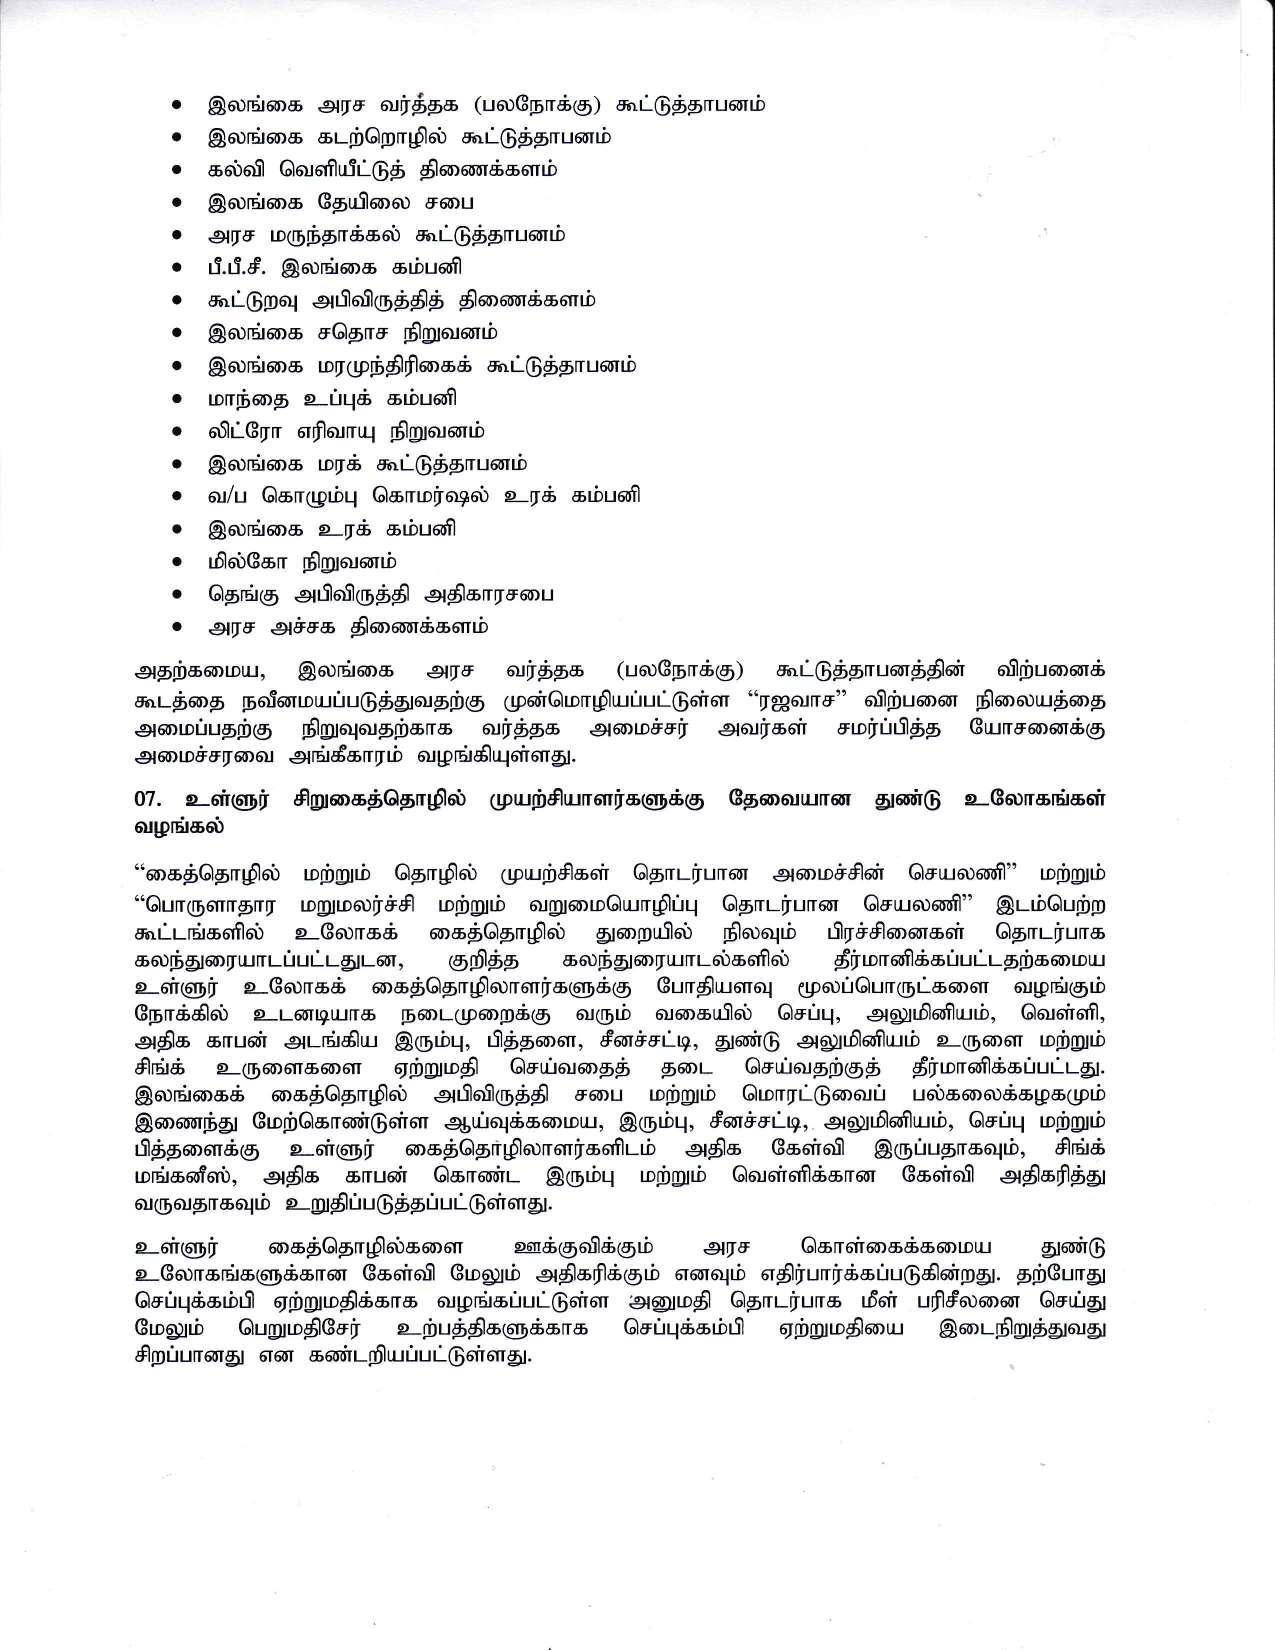 Cabinet Decsion on 09.11.2020 Tamil page 003